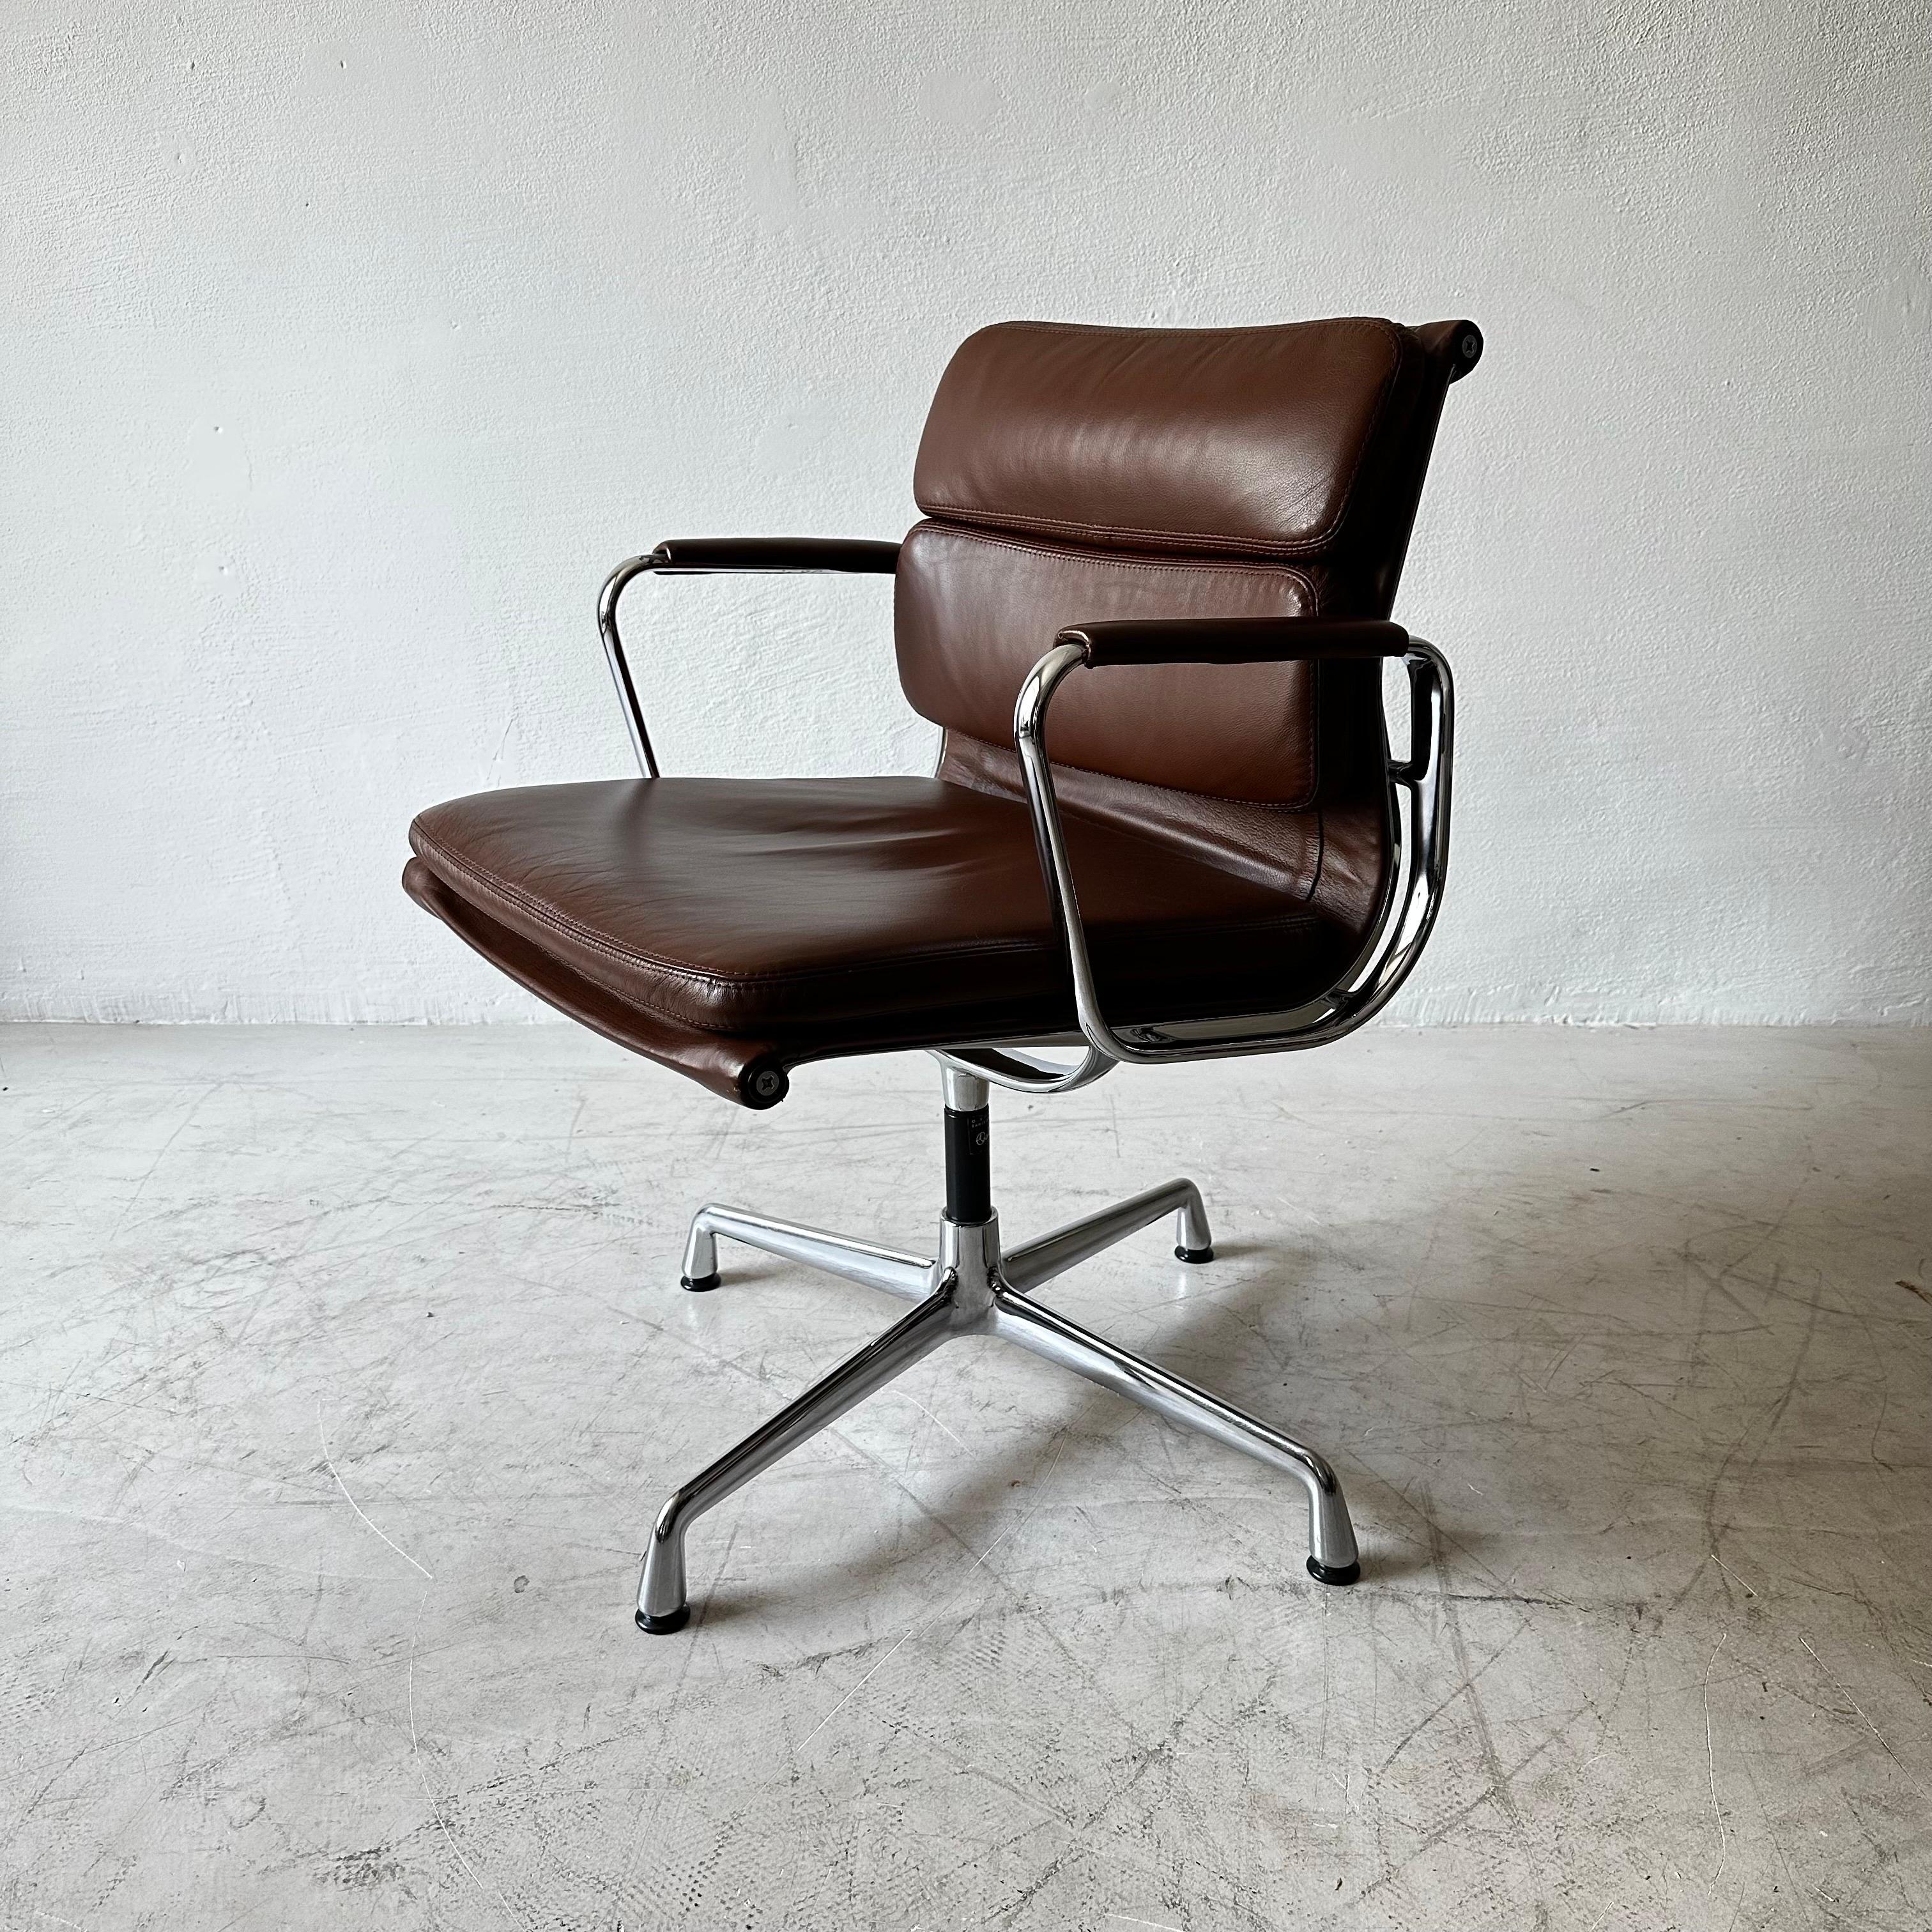 Rare set of 10 Soft Pad chairs EA208 by Charles Eames in dark cognac leather and chromed metal.
Vitra label and mark on the base. Height 84cm. In very good vintage condition.

Good looking and super comfortable office or dining chairs. This is